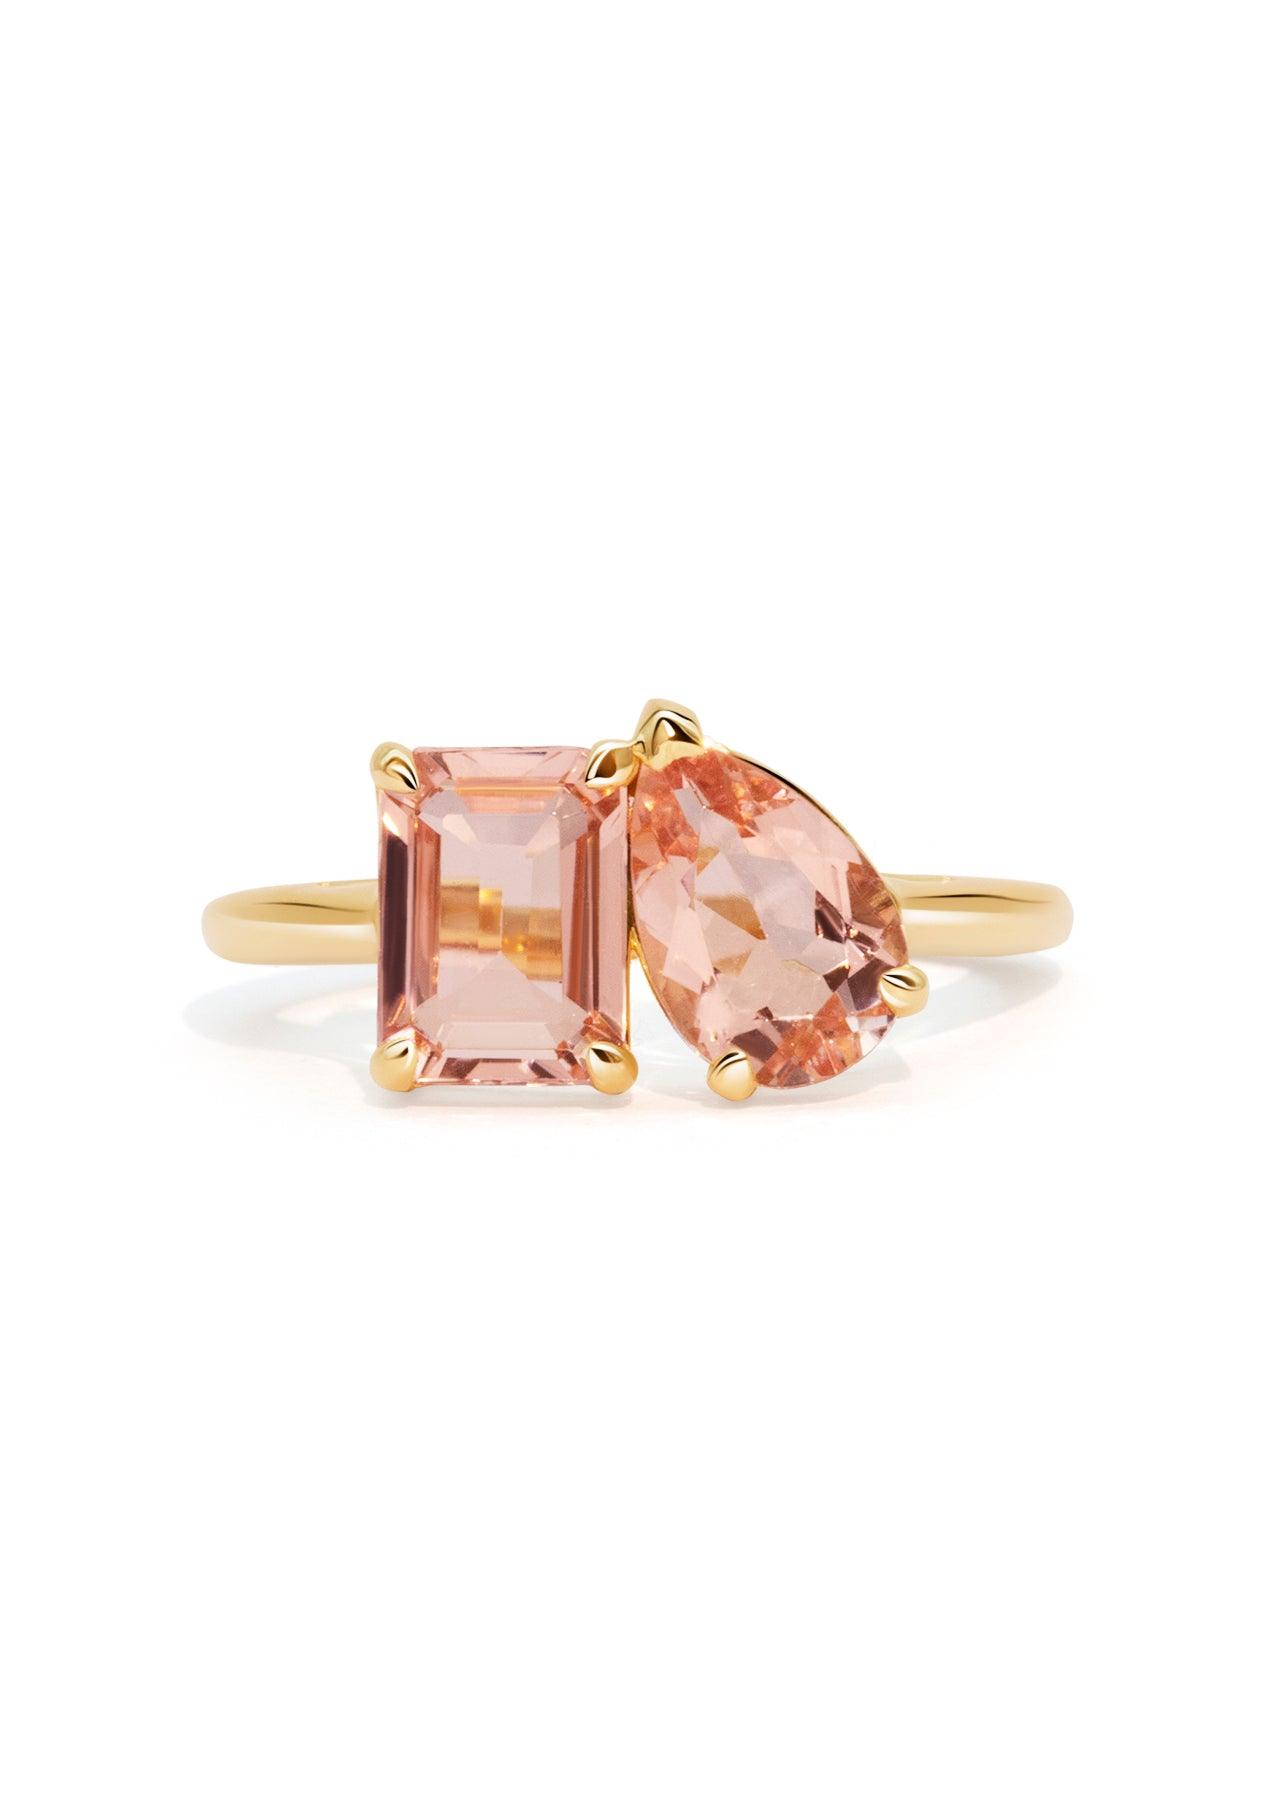 The Toi Et Moi 1.27ct and 1.01ct Morganite Ring - Molten Store